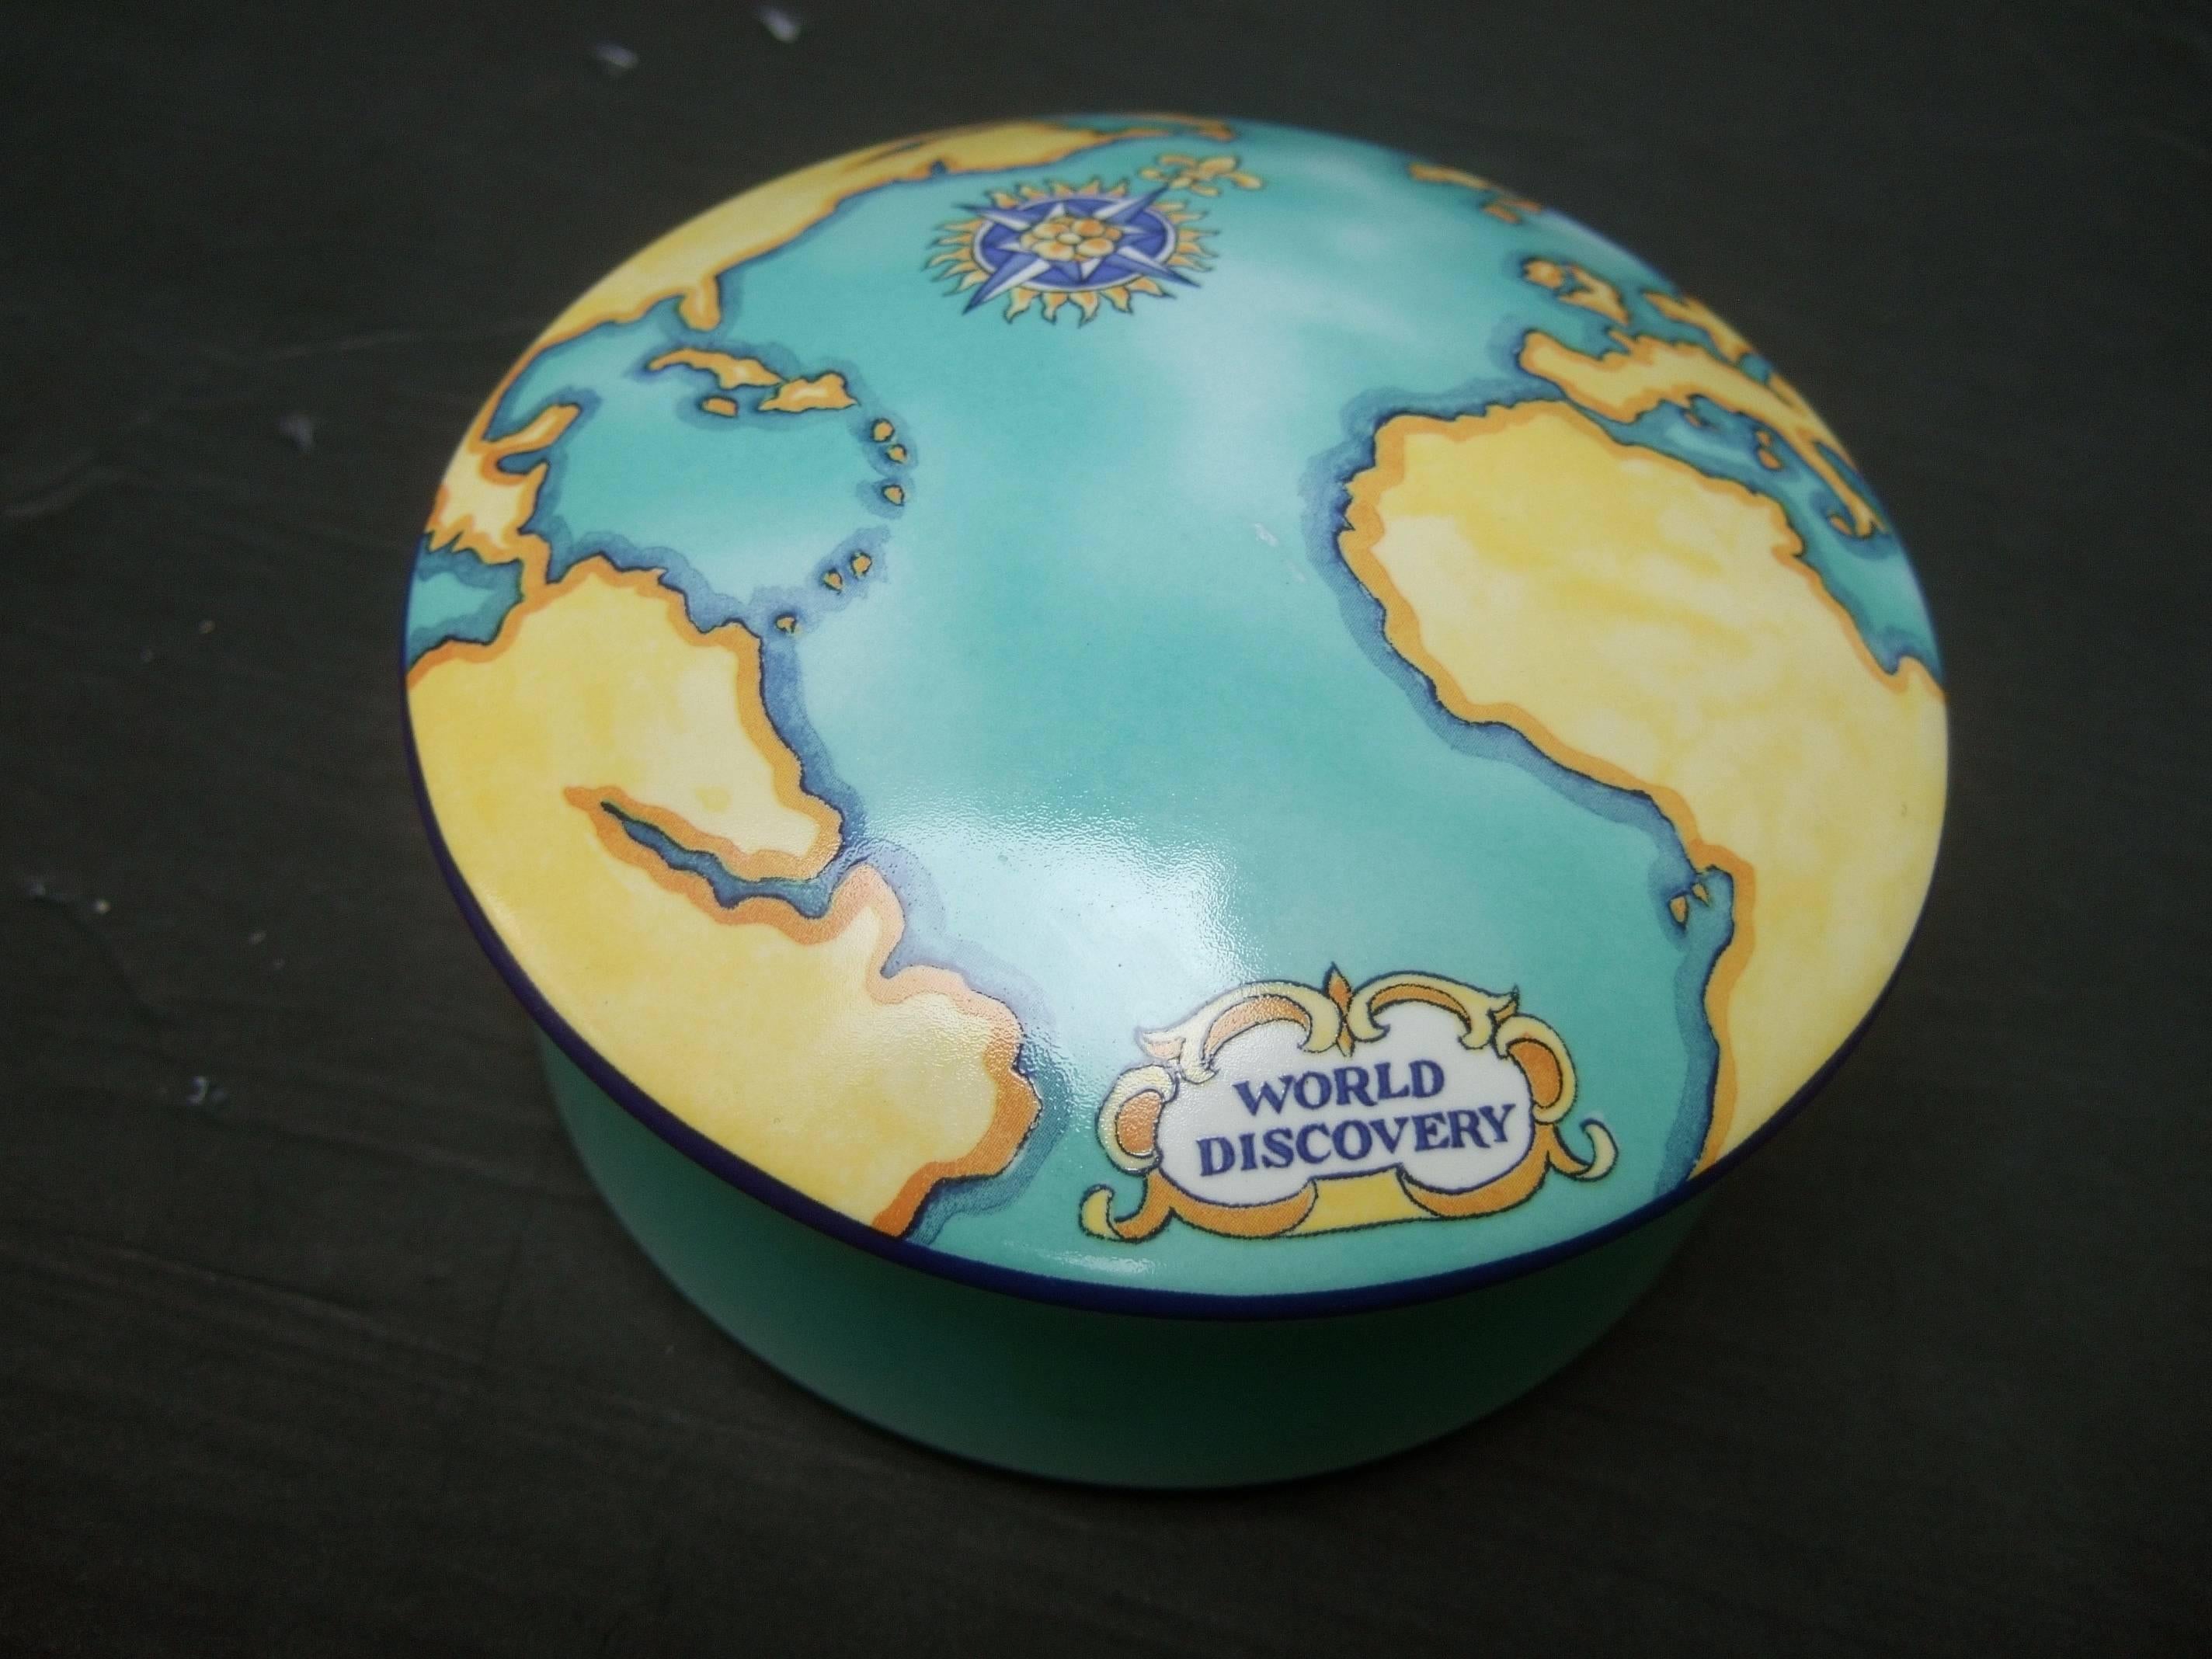 Tiffany & Co Porcelain round dish map dish designed for Tauck World Discoveries

The porcelain lid cover is decorated with several continents;
Africa, Europe, North and South America 

The round porcelain dish was designed by Tiffany & Co. 
for